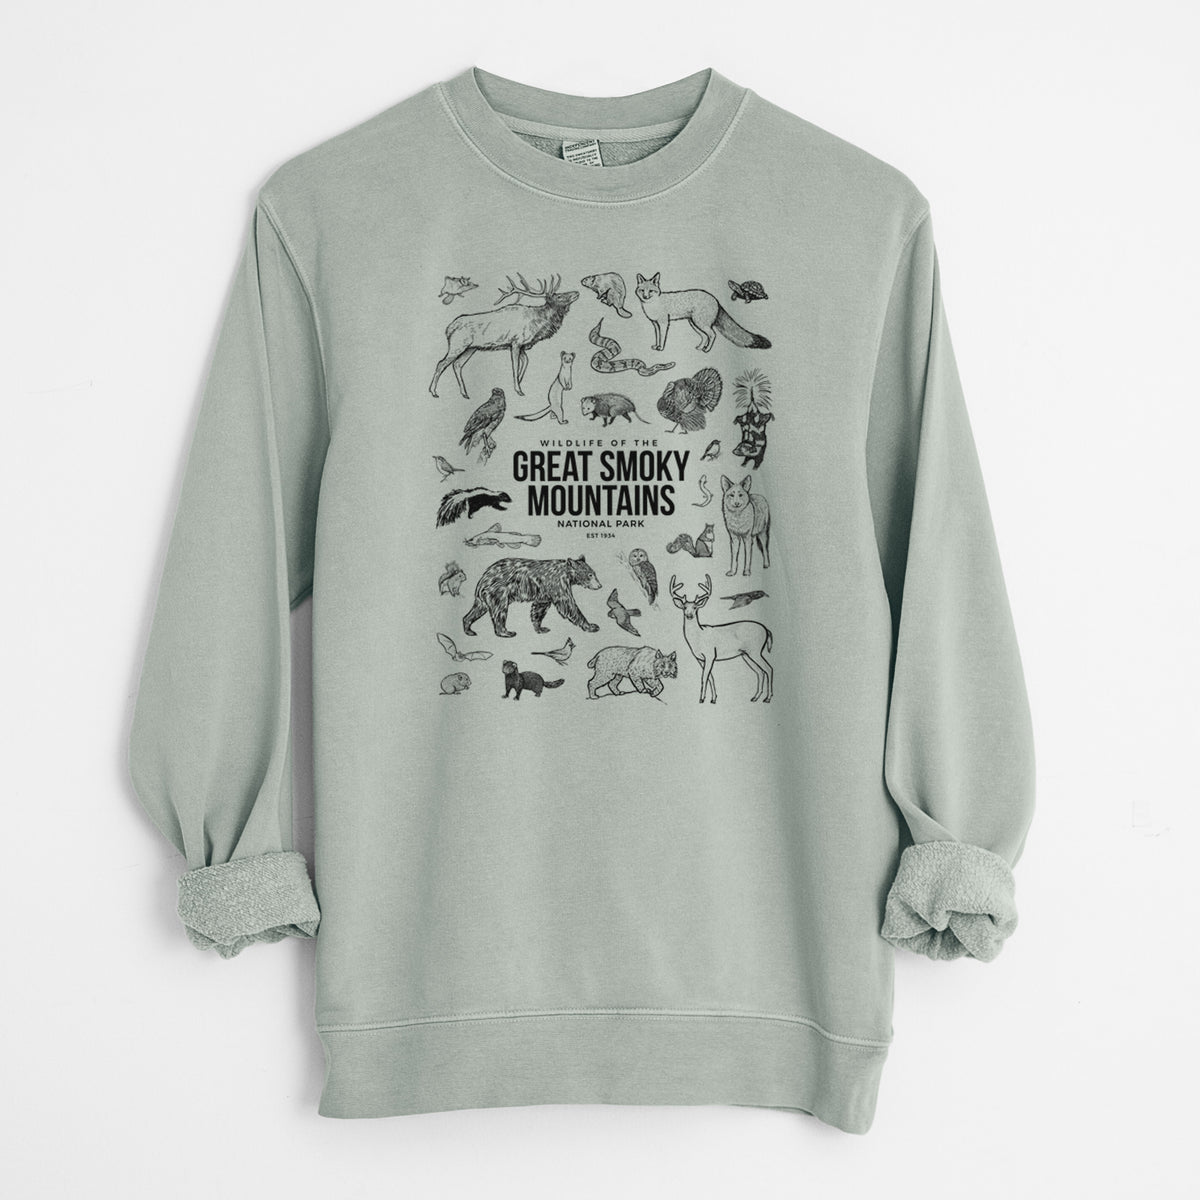 Wildlife of the Great Smoky Mountains National Park - Unisex Pigment Dyed Crew Sweatshirt